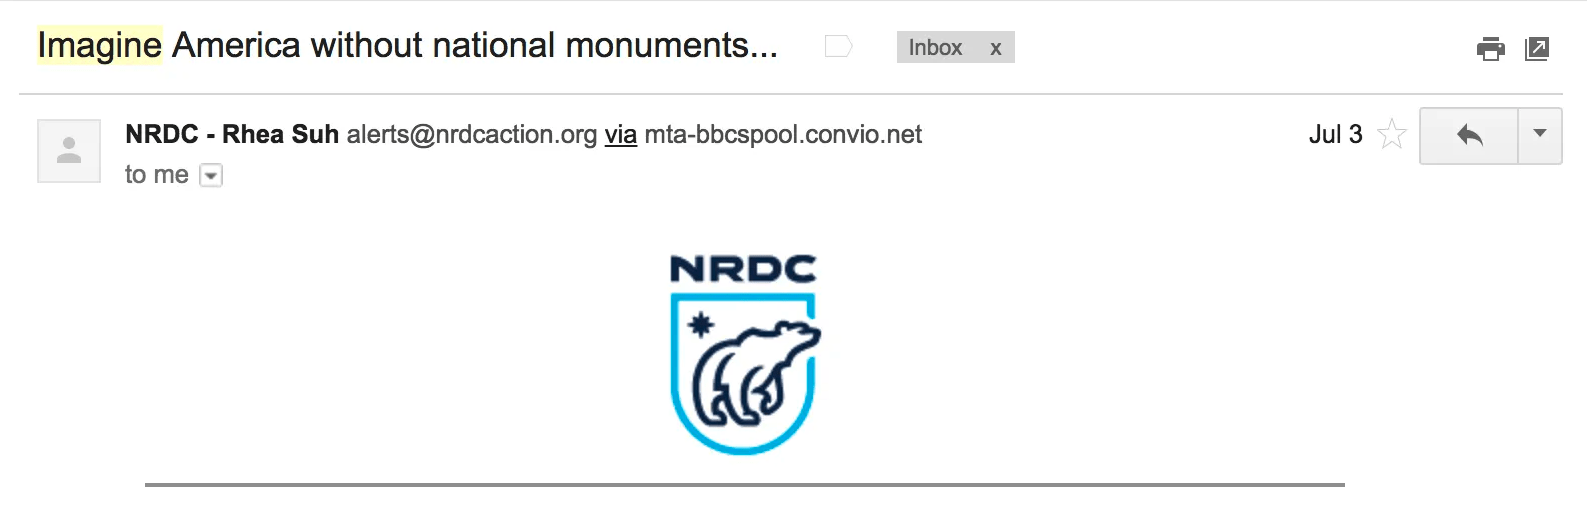 Best Email Subject Lines: Screenshot of email from Natural Resources Defense Council (NRDC)